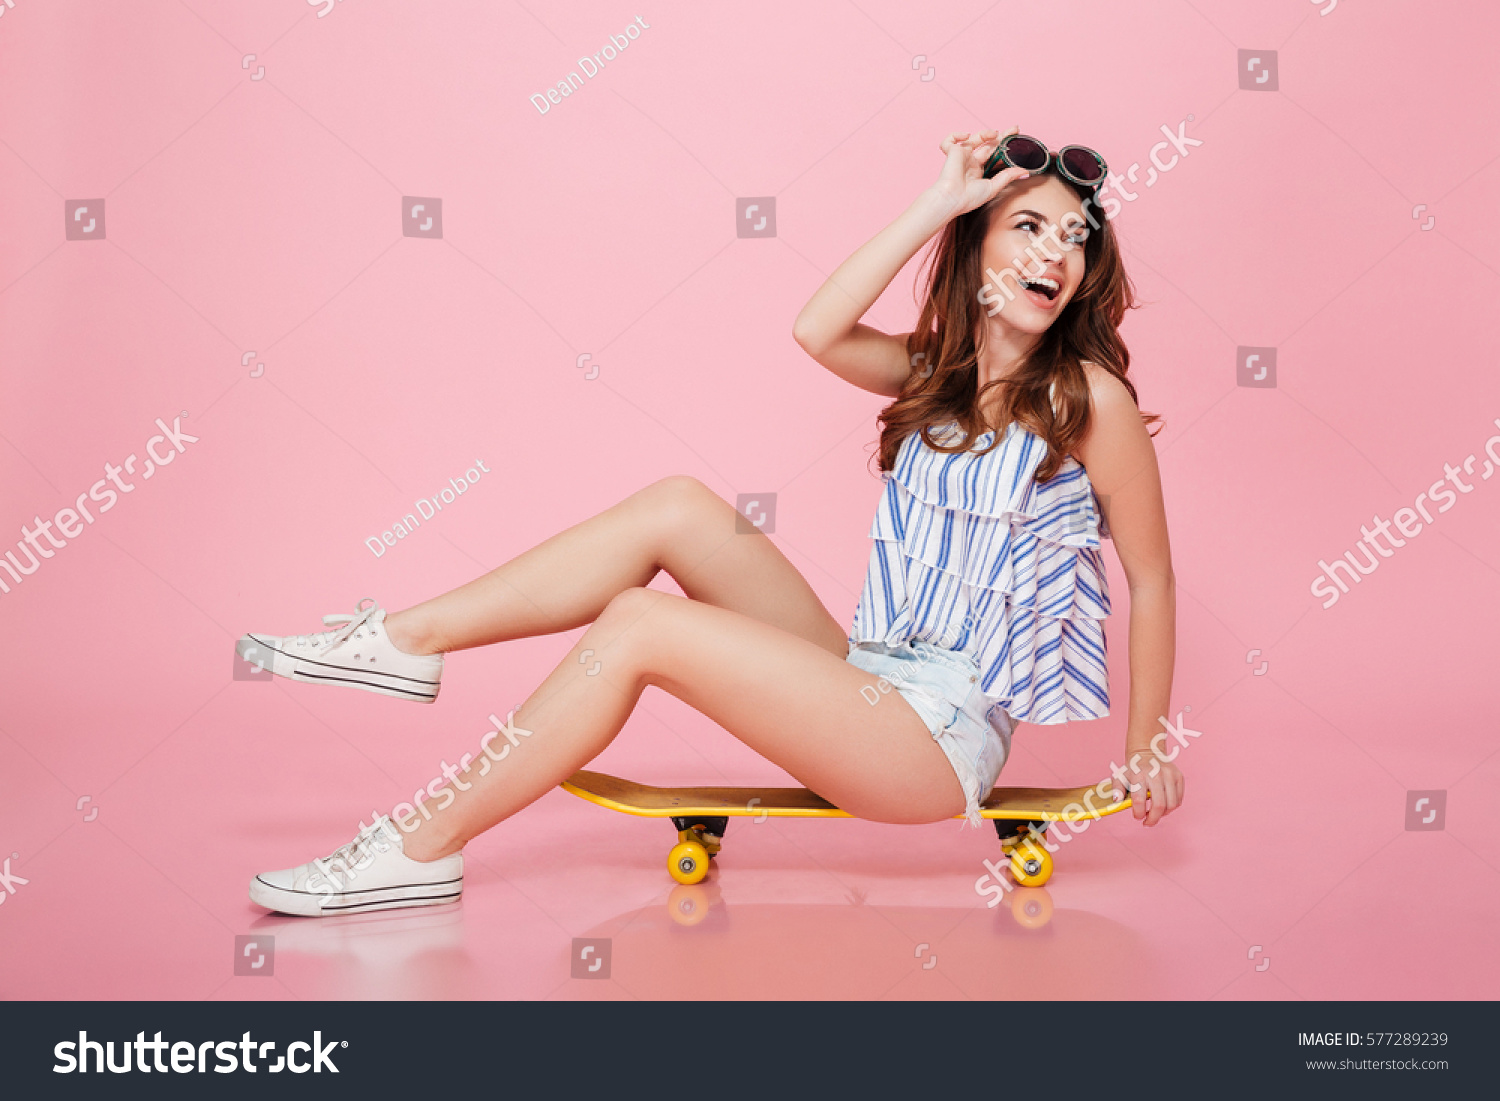 Happy attractive young woman in sunglasses sitting on skateboard over pink background #577289239